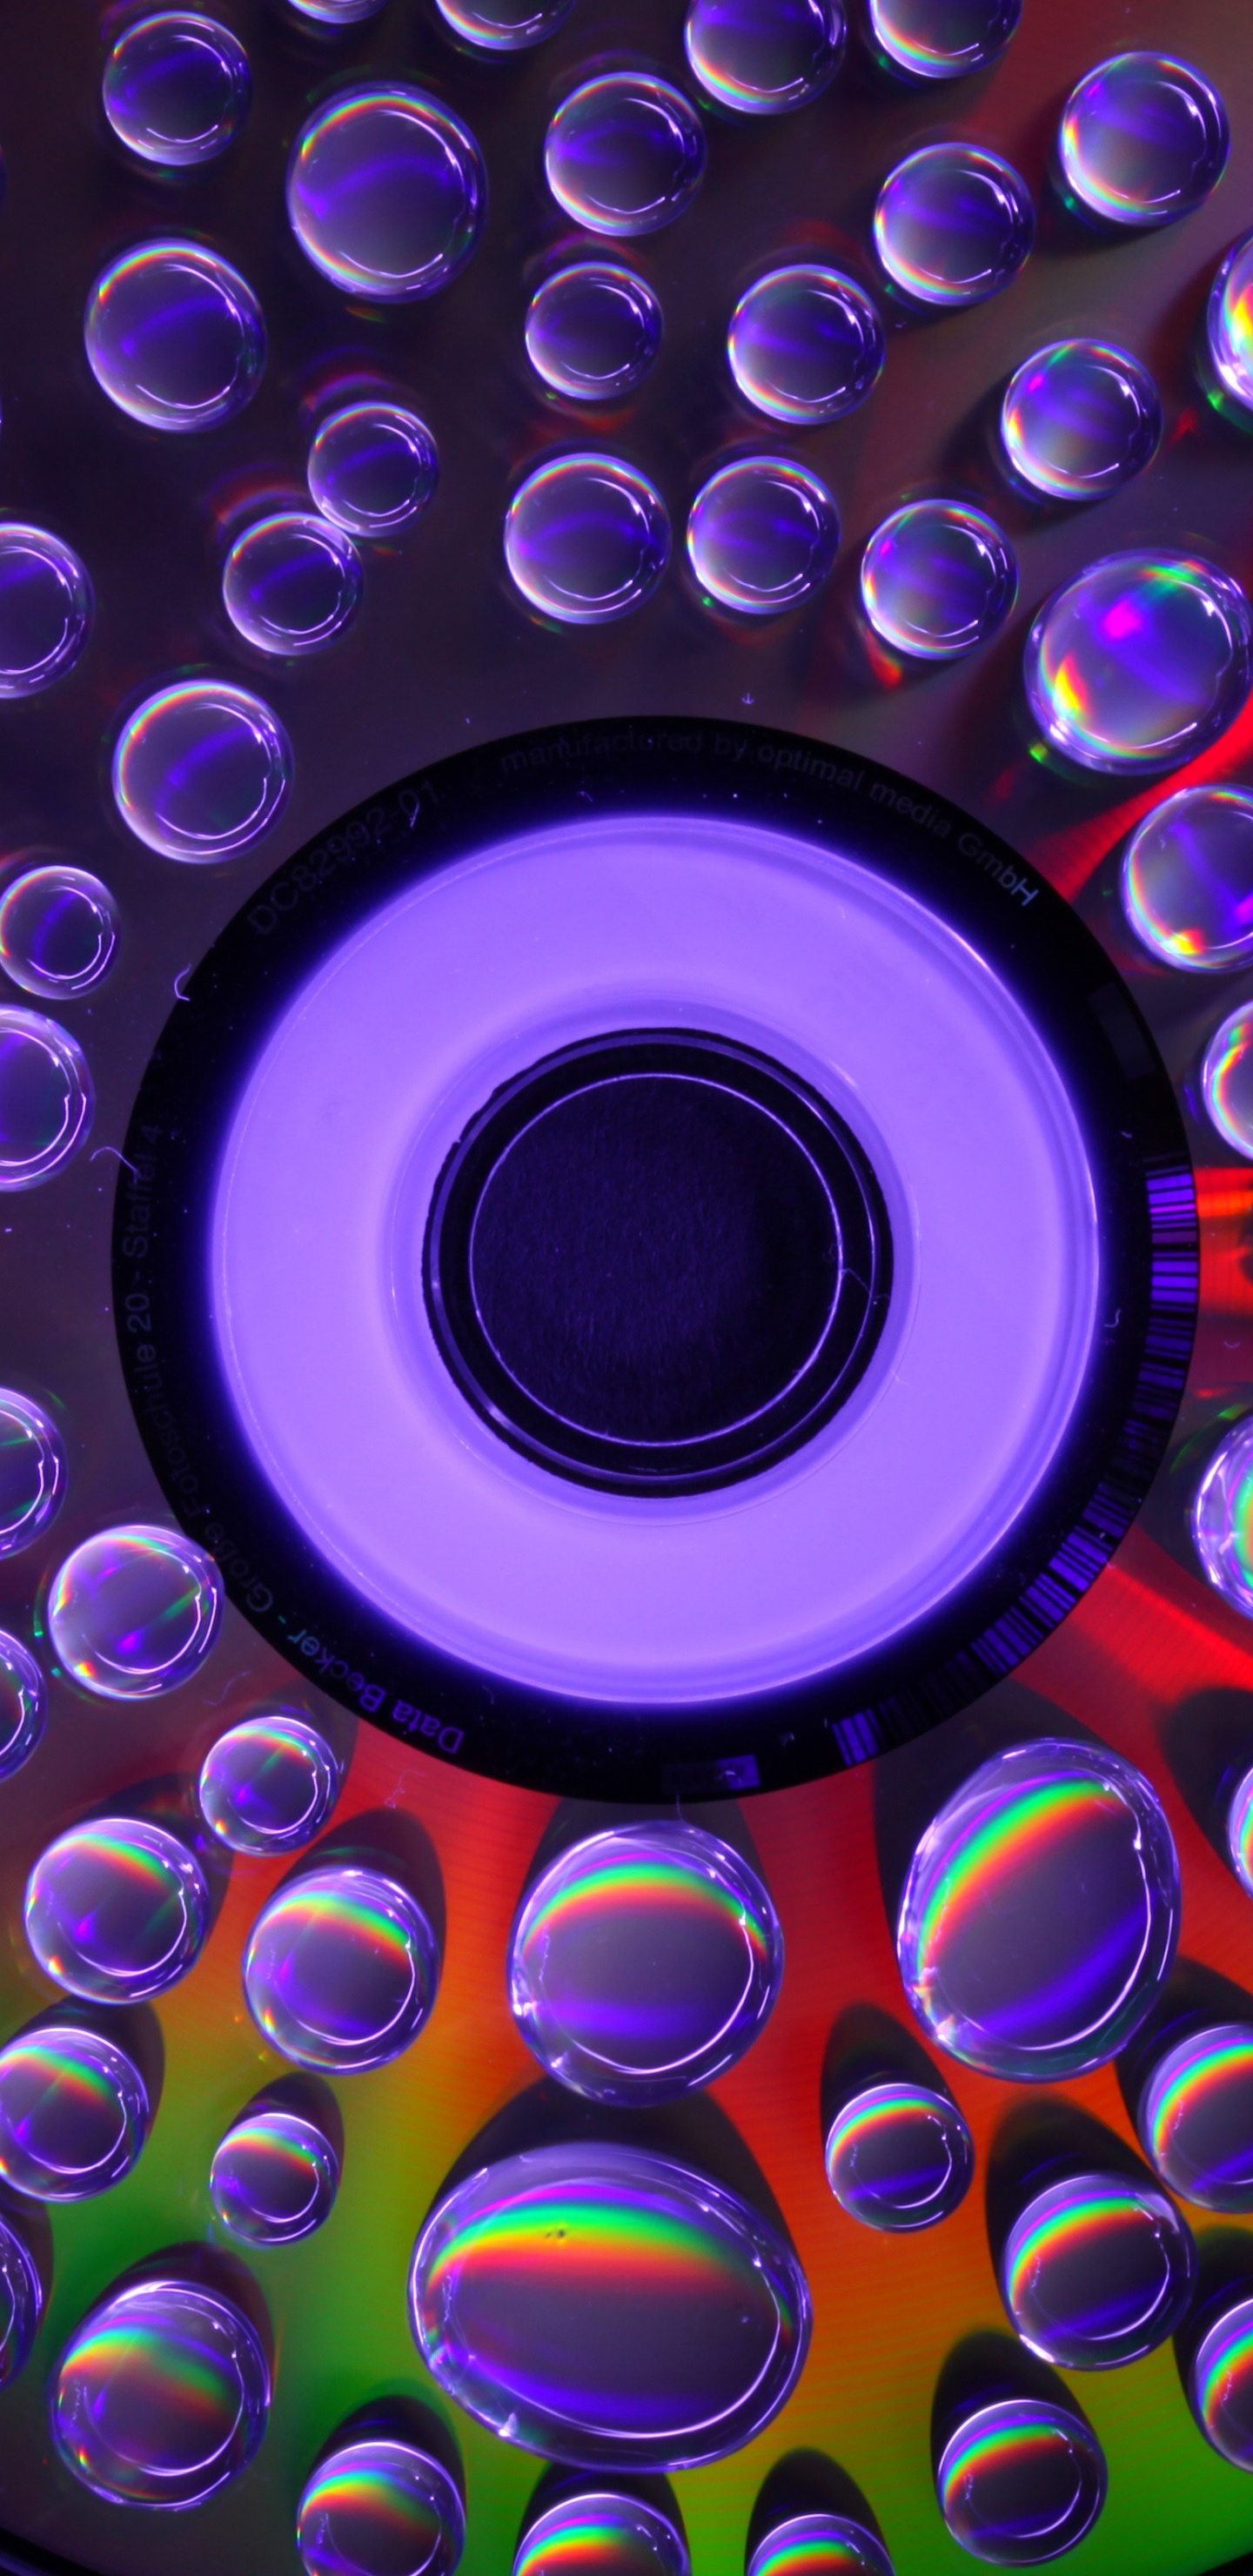 Data Storage Device, DVD, Circle, Technology, Colorfulness. Wallpaper in 1440x2960 Resolution